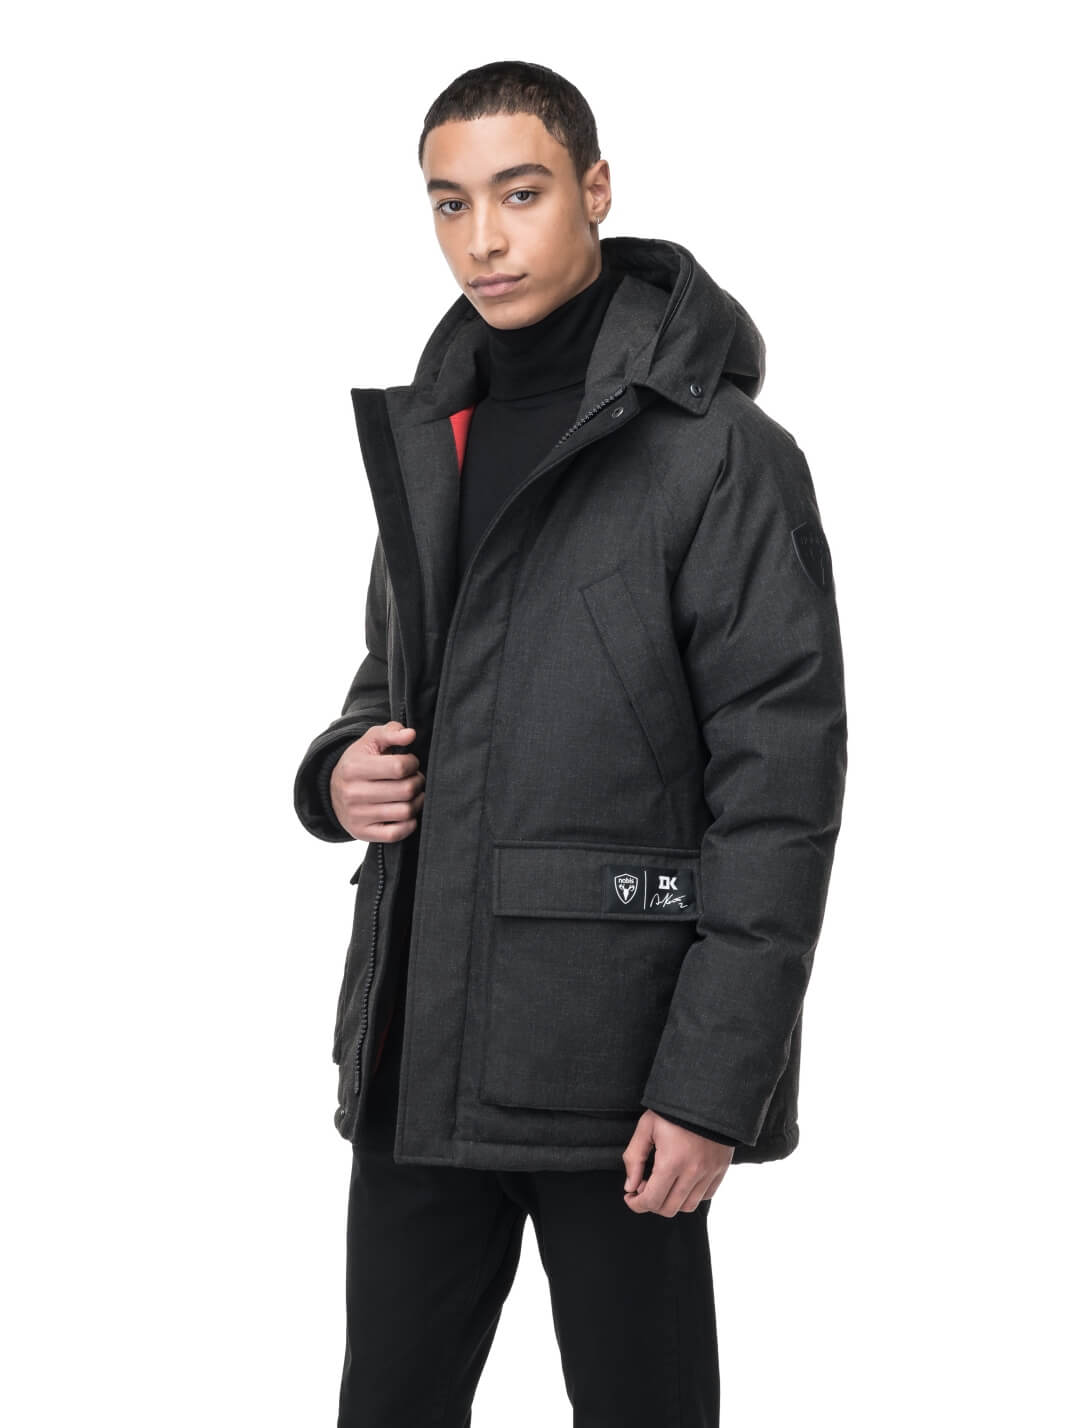 Duncan Keith Heritage Men's Parka in hip length, and features Canadian duck down insulation, non-removable hood with removable coyote fur trim, fleece-lined chest pockets, top and side entry waist pockets, adjustable waist cord, interior zipper pocket, and co-branding with Keith's signature on the left outer waist pocket, in H. Black